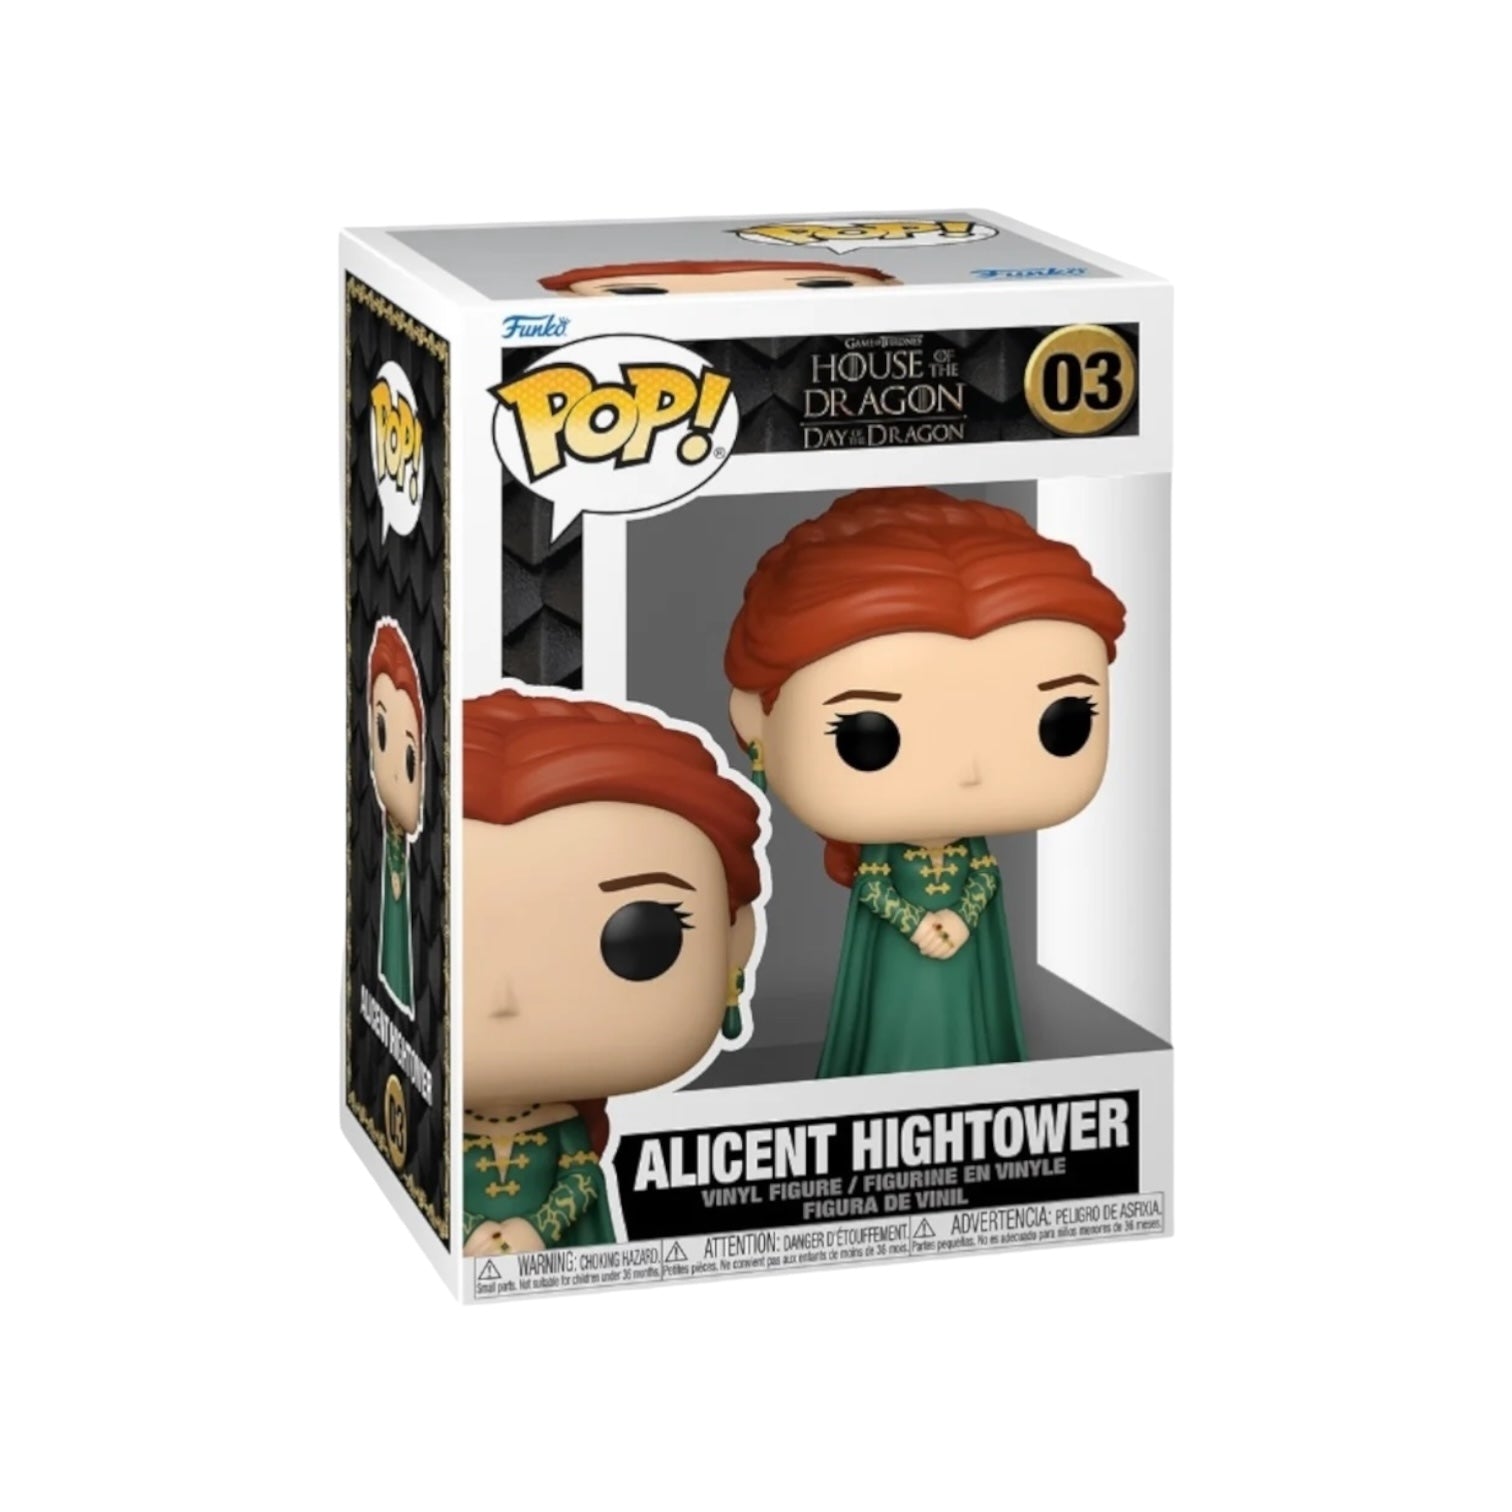 Alicent Hightower #03 Funko Pop! - House of the Dragon